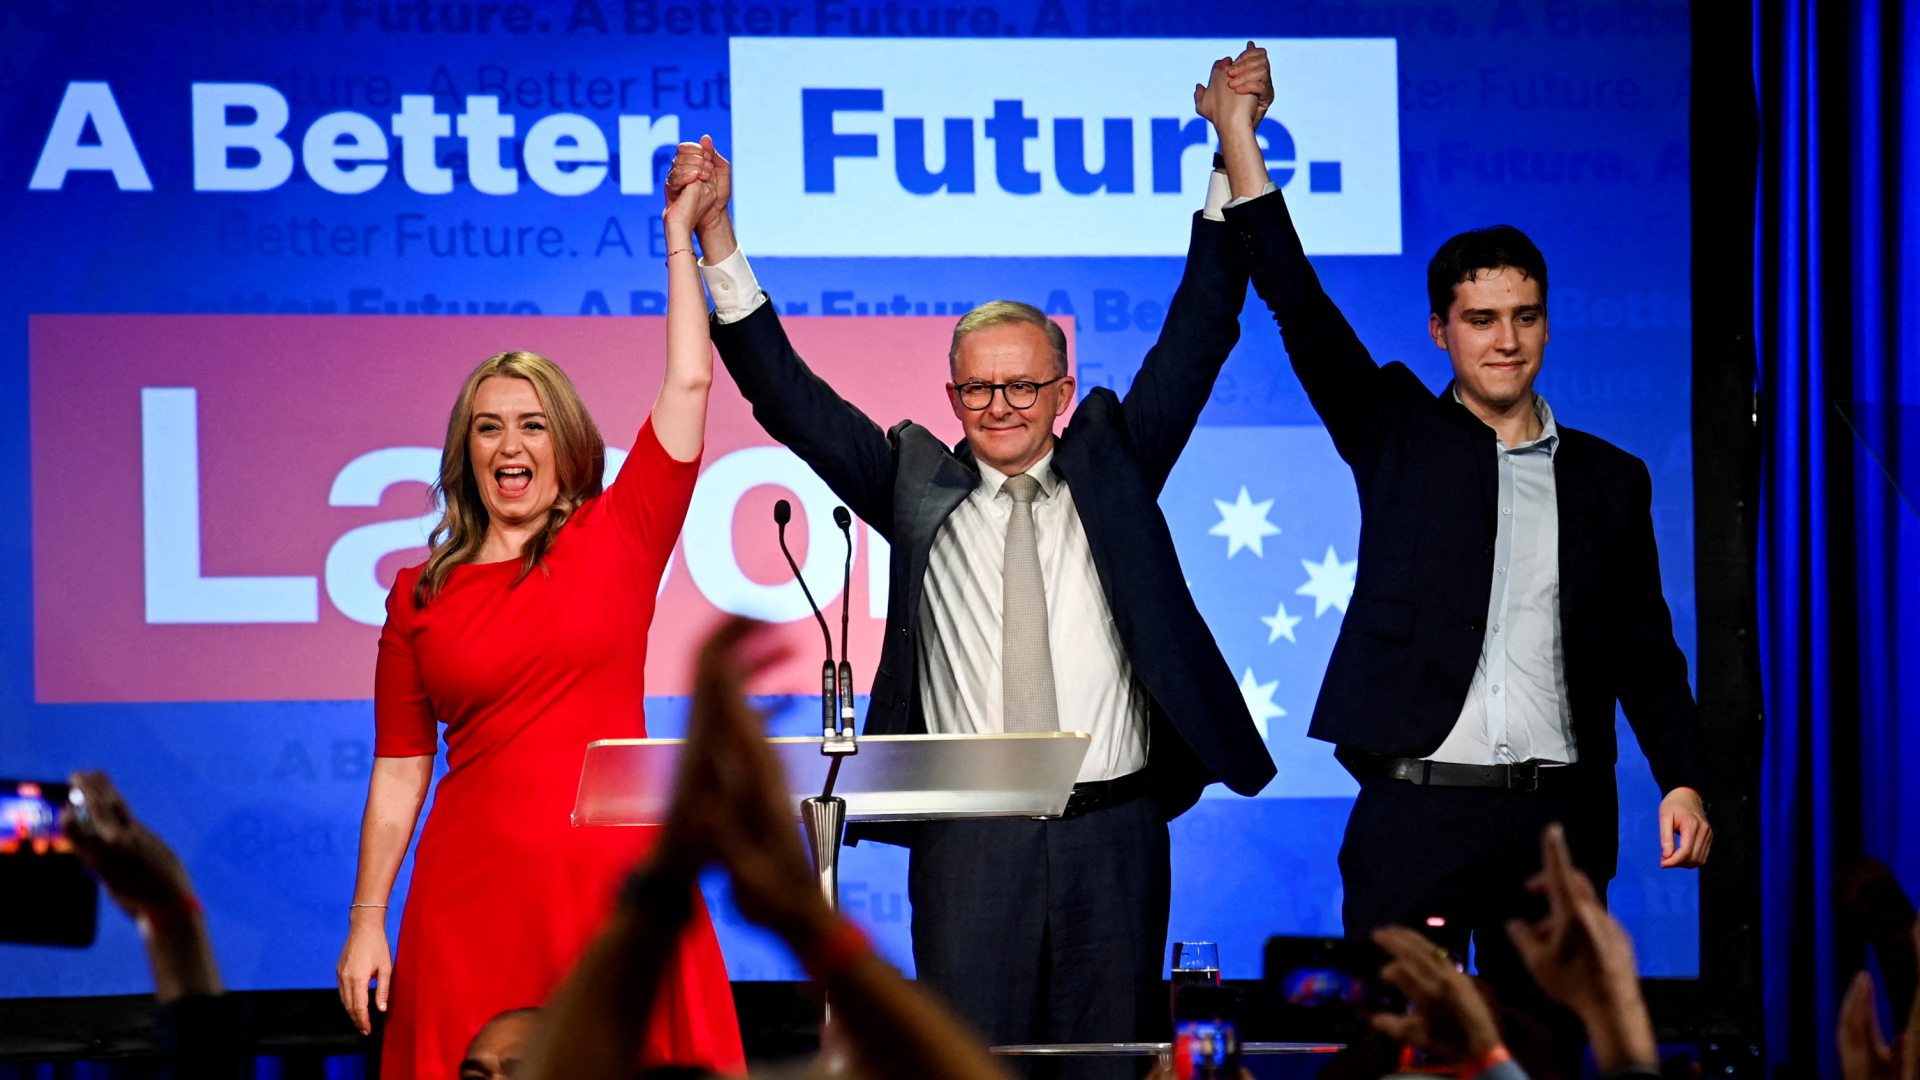 Albany wins election: Australia’s new Prime Minister takes office